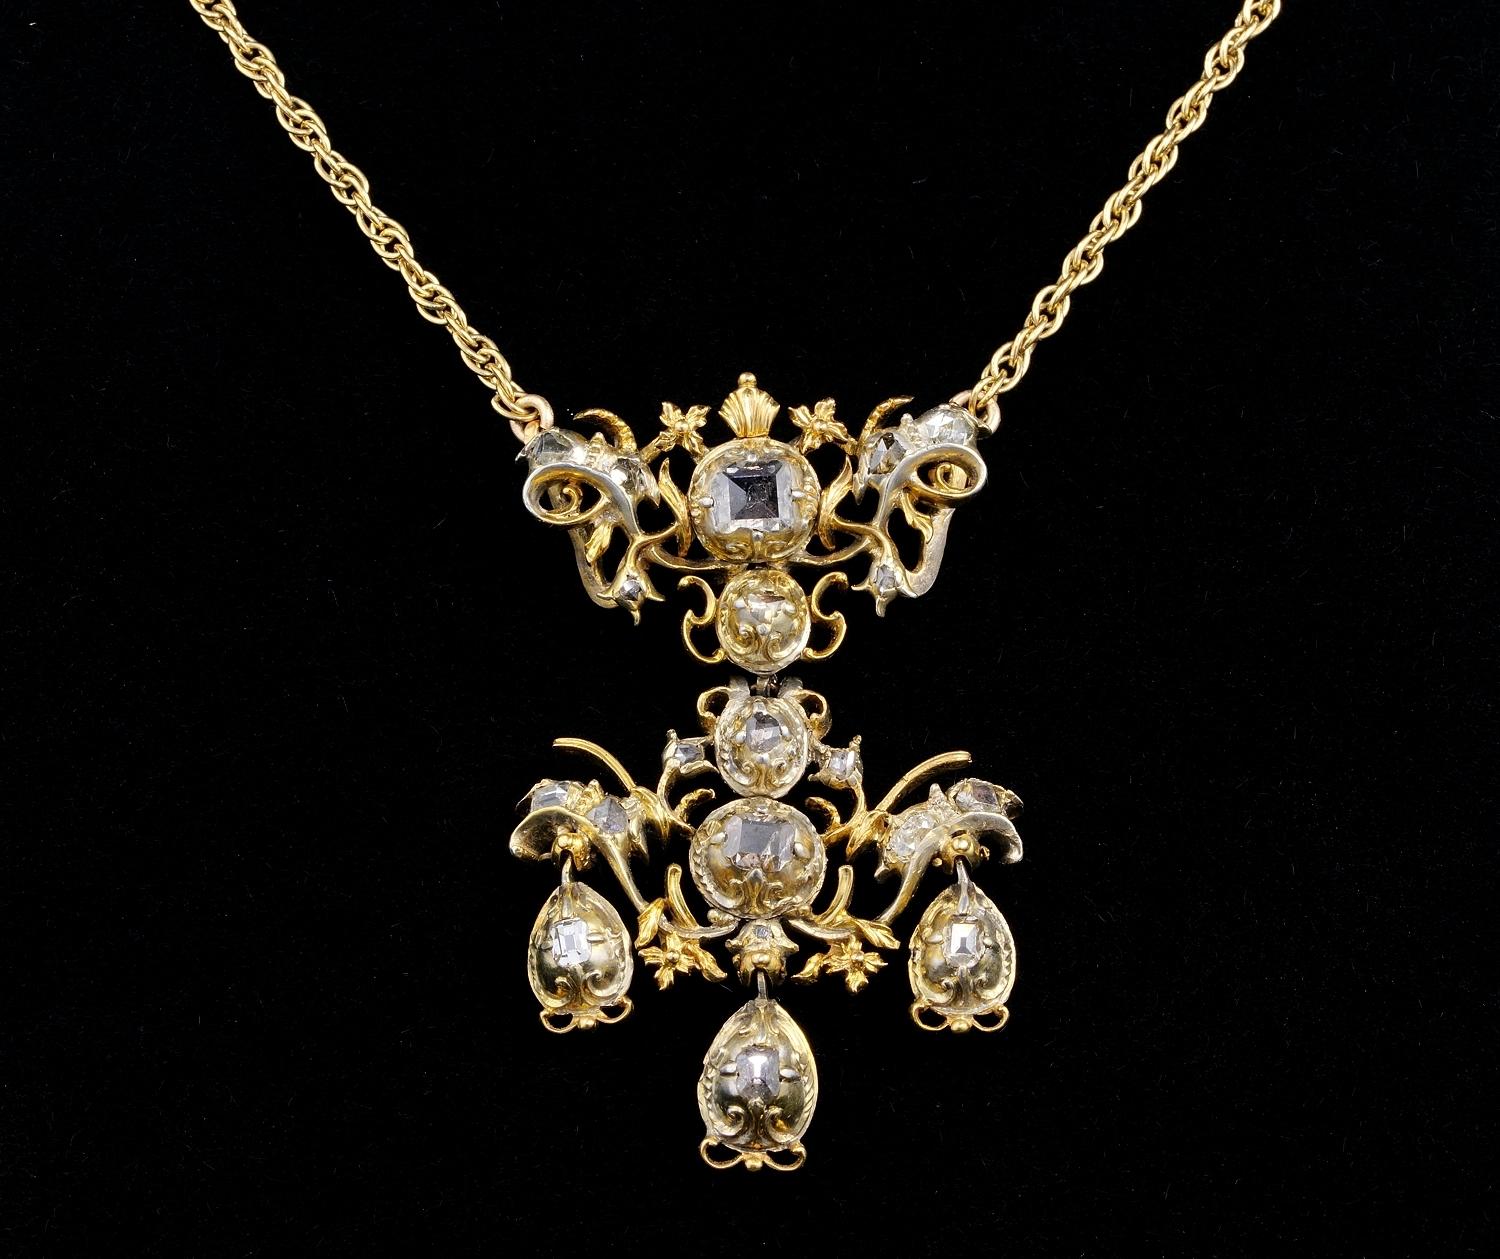 This beautiful Baroque Georgian period pendant is silver pure gold gilt, 1700 ca
Combined with an antique Victorian period (latter in time than the pendant) 9 KT solid gold chain which matches nicely to the pendant
Pendant is  designed in a top Bow